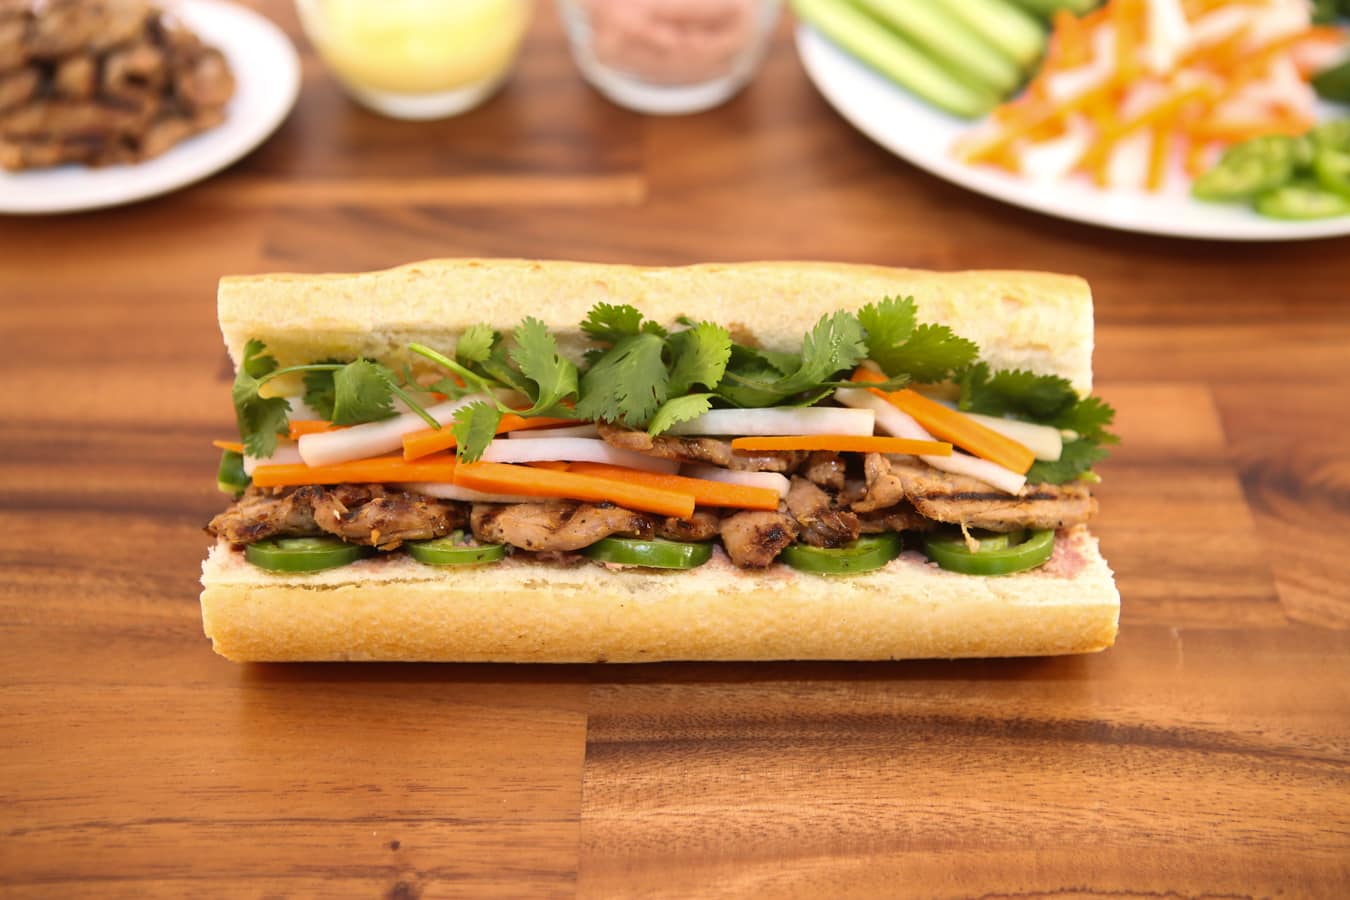 Grilled Pork Sandwich (Banh Mi Thit Nuong) recipe from runawayrice.com.